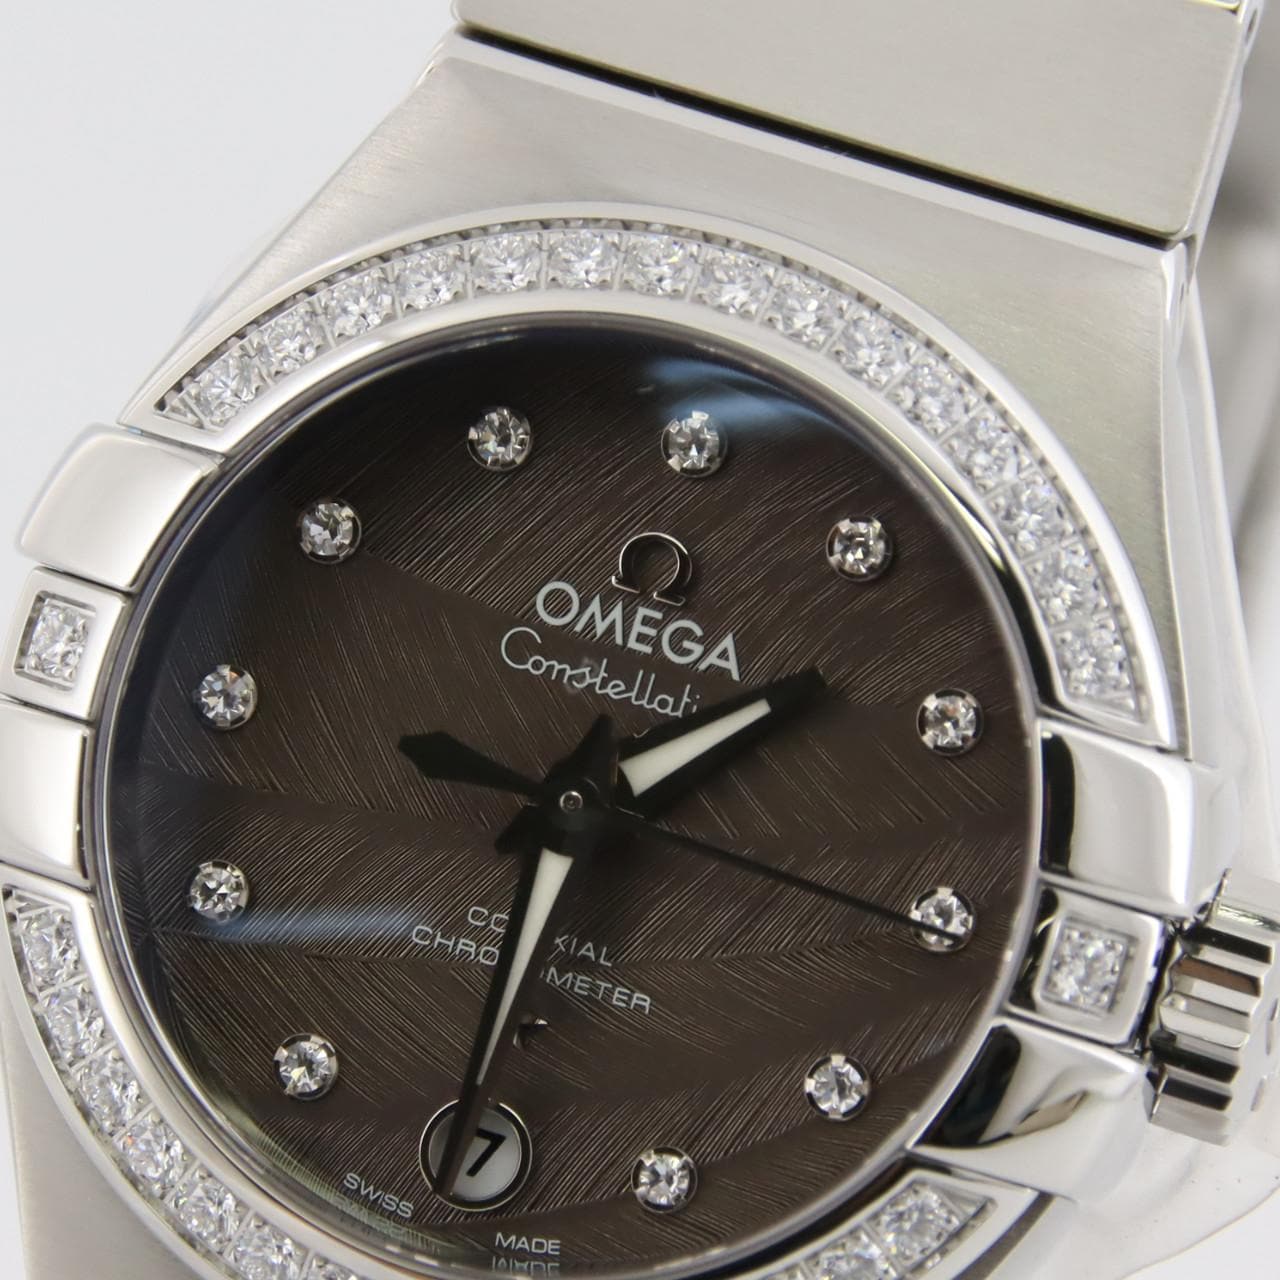 [BRAND NEW] Omega Constellation Blush/D･11P 123.15.27.20.56.001 SS Automatic